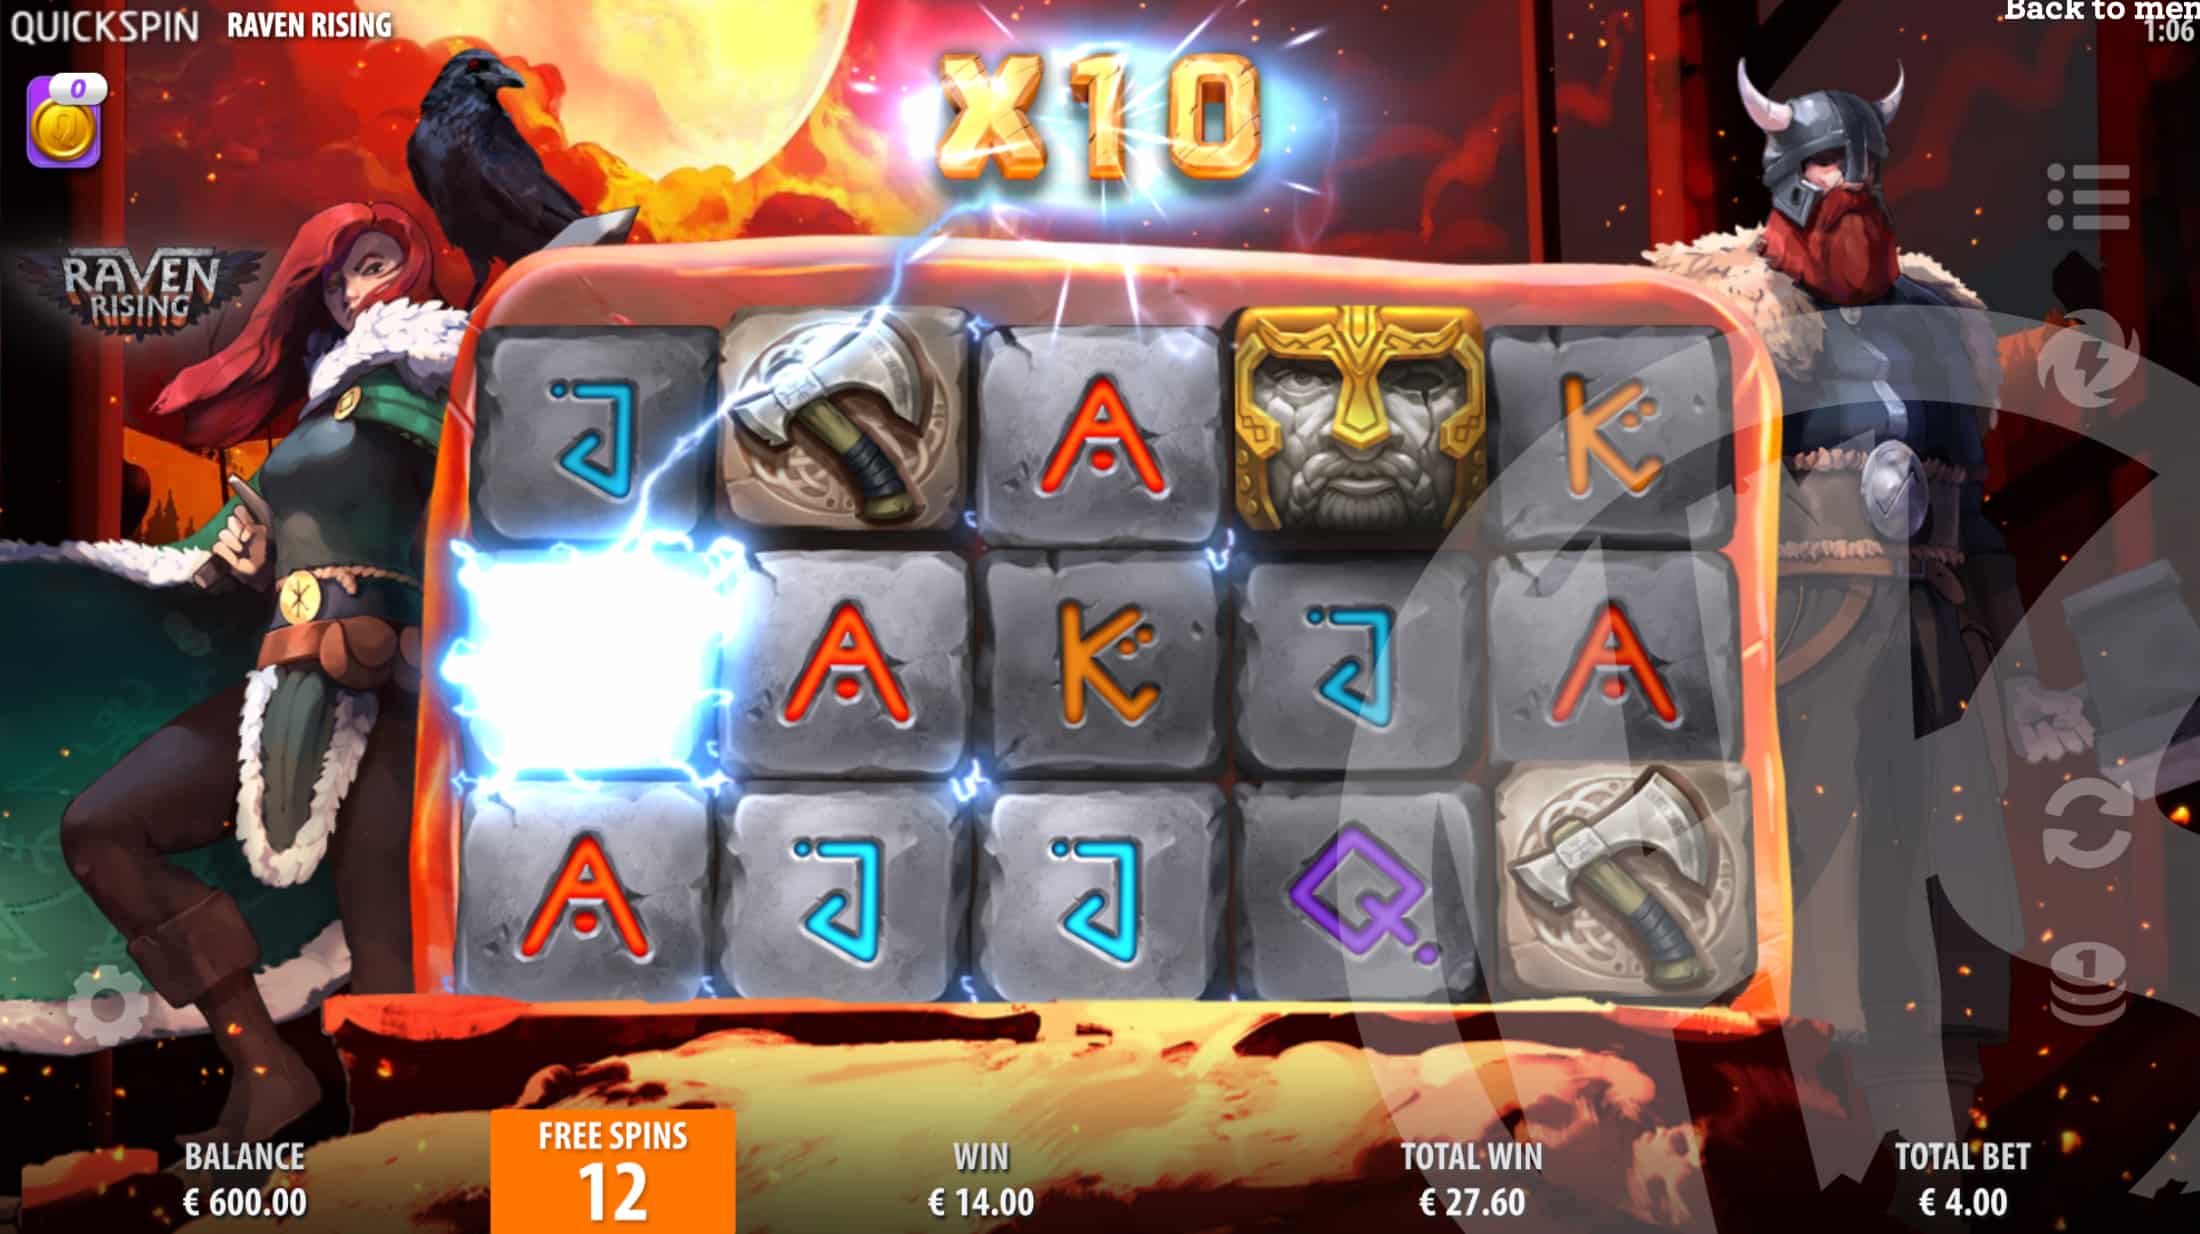 In Ragnarök Free Spins, the Win Multiplier Increases By +1 for Every Symbol That is Removed